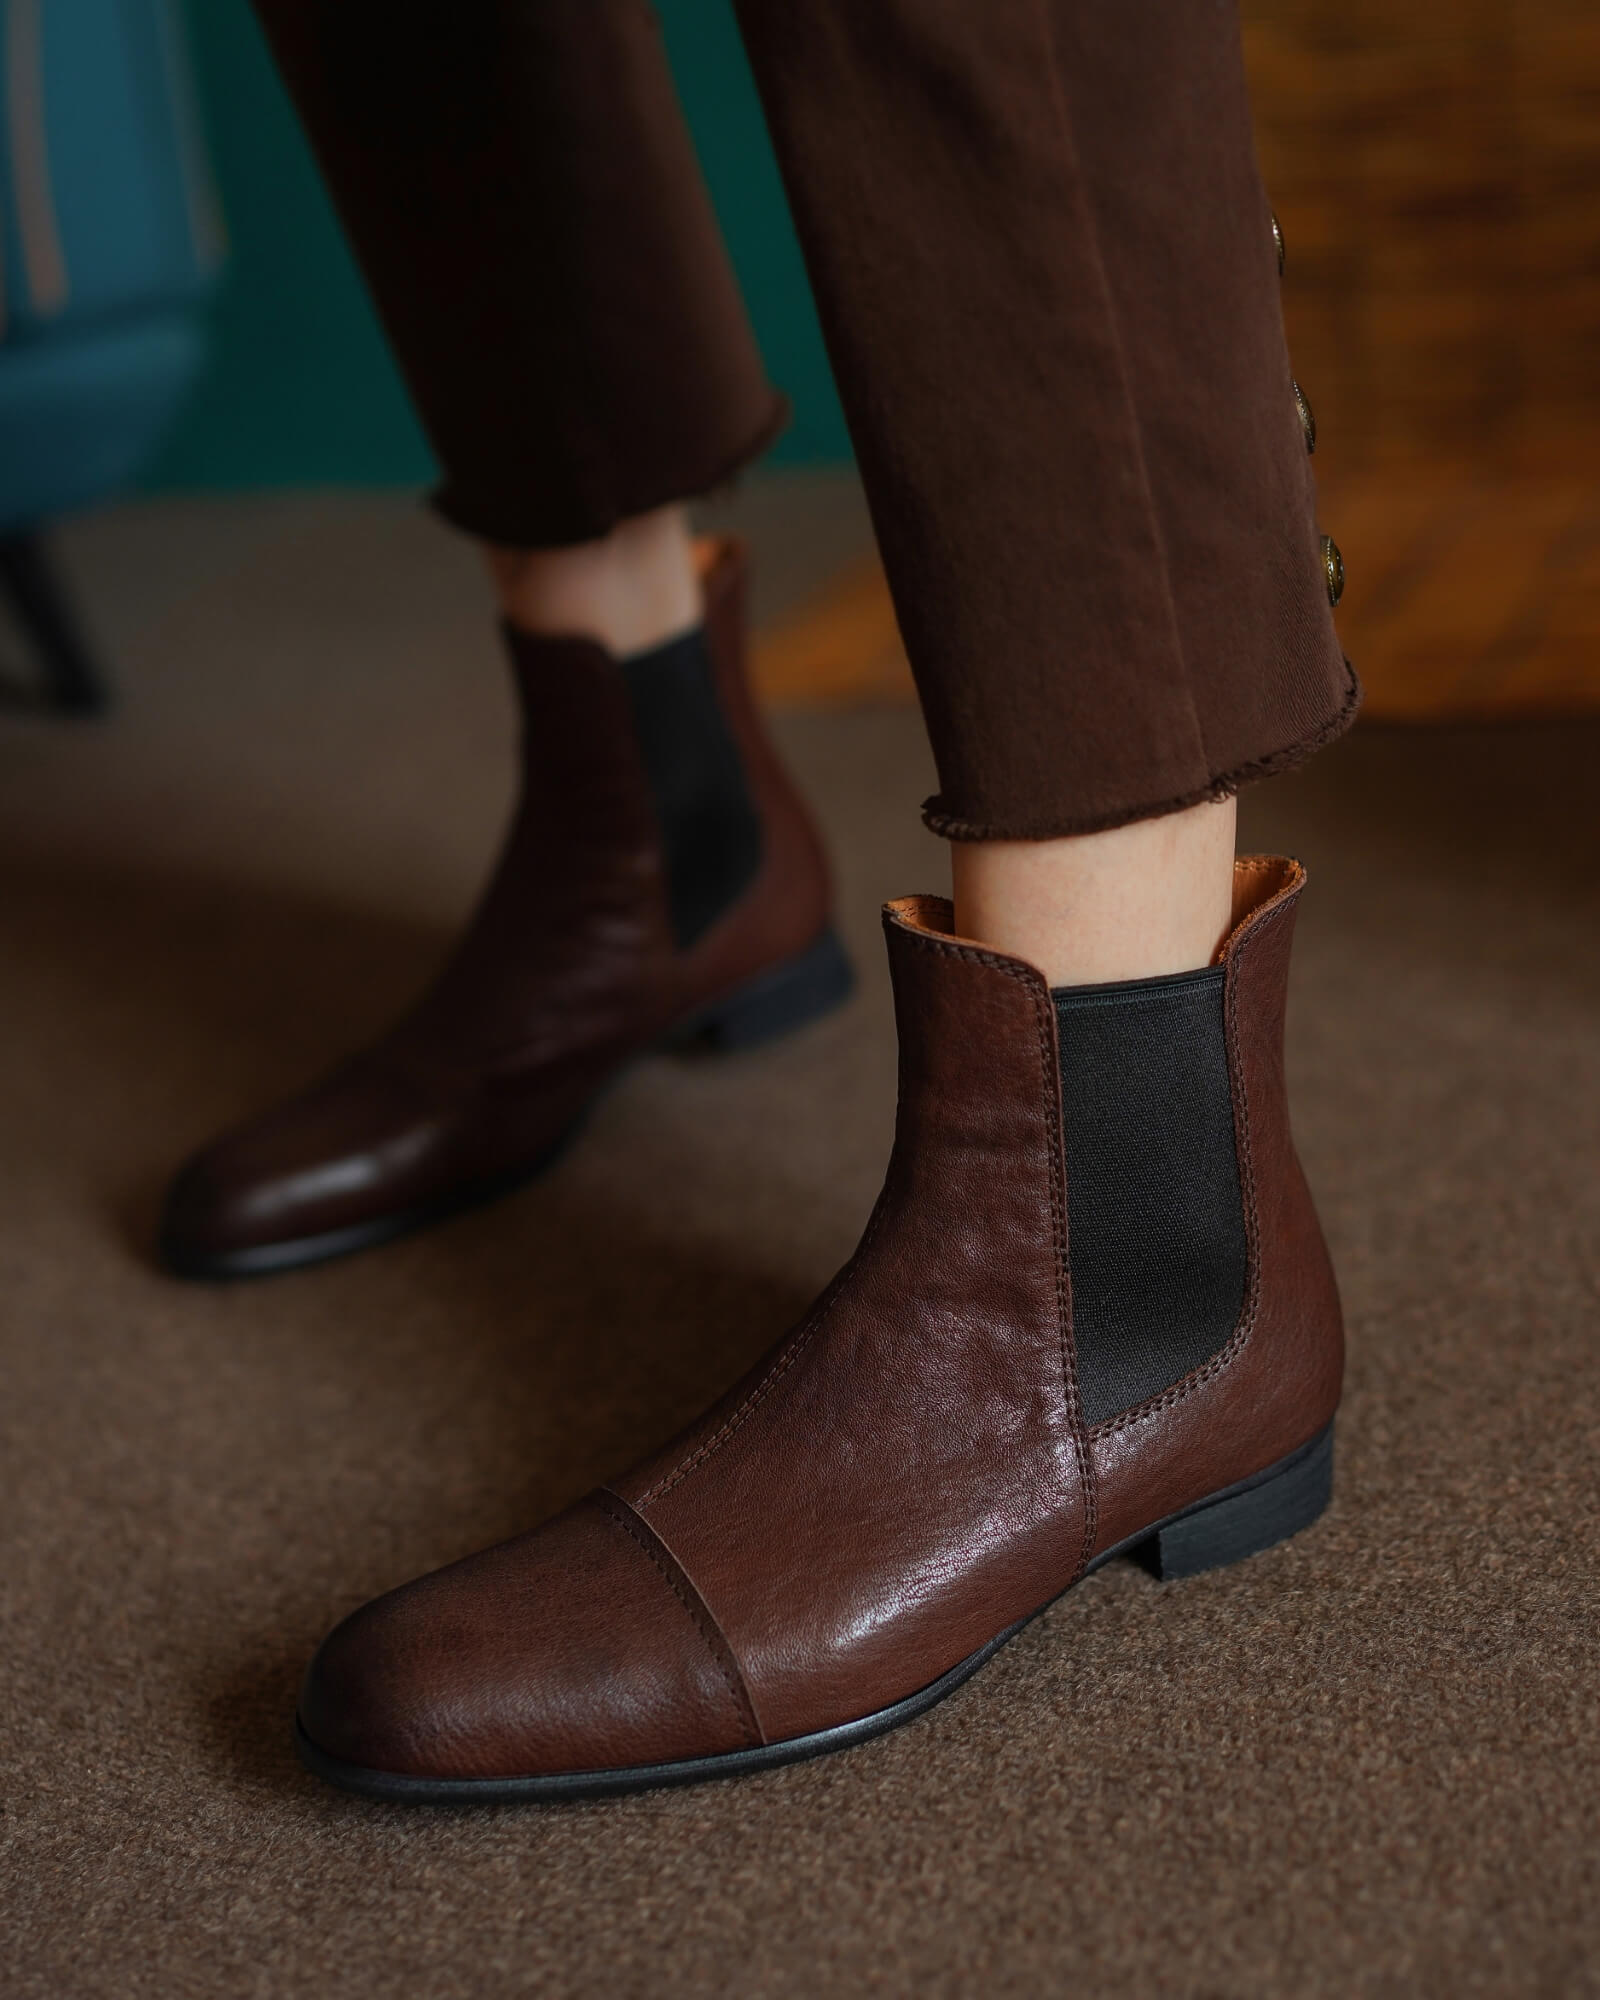 370-cap-toe-brown-leather-boots-model